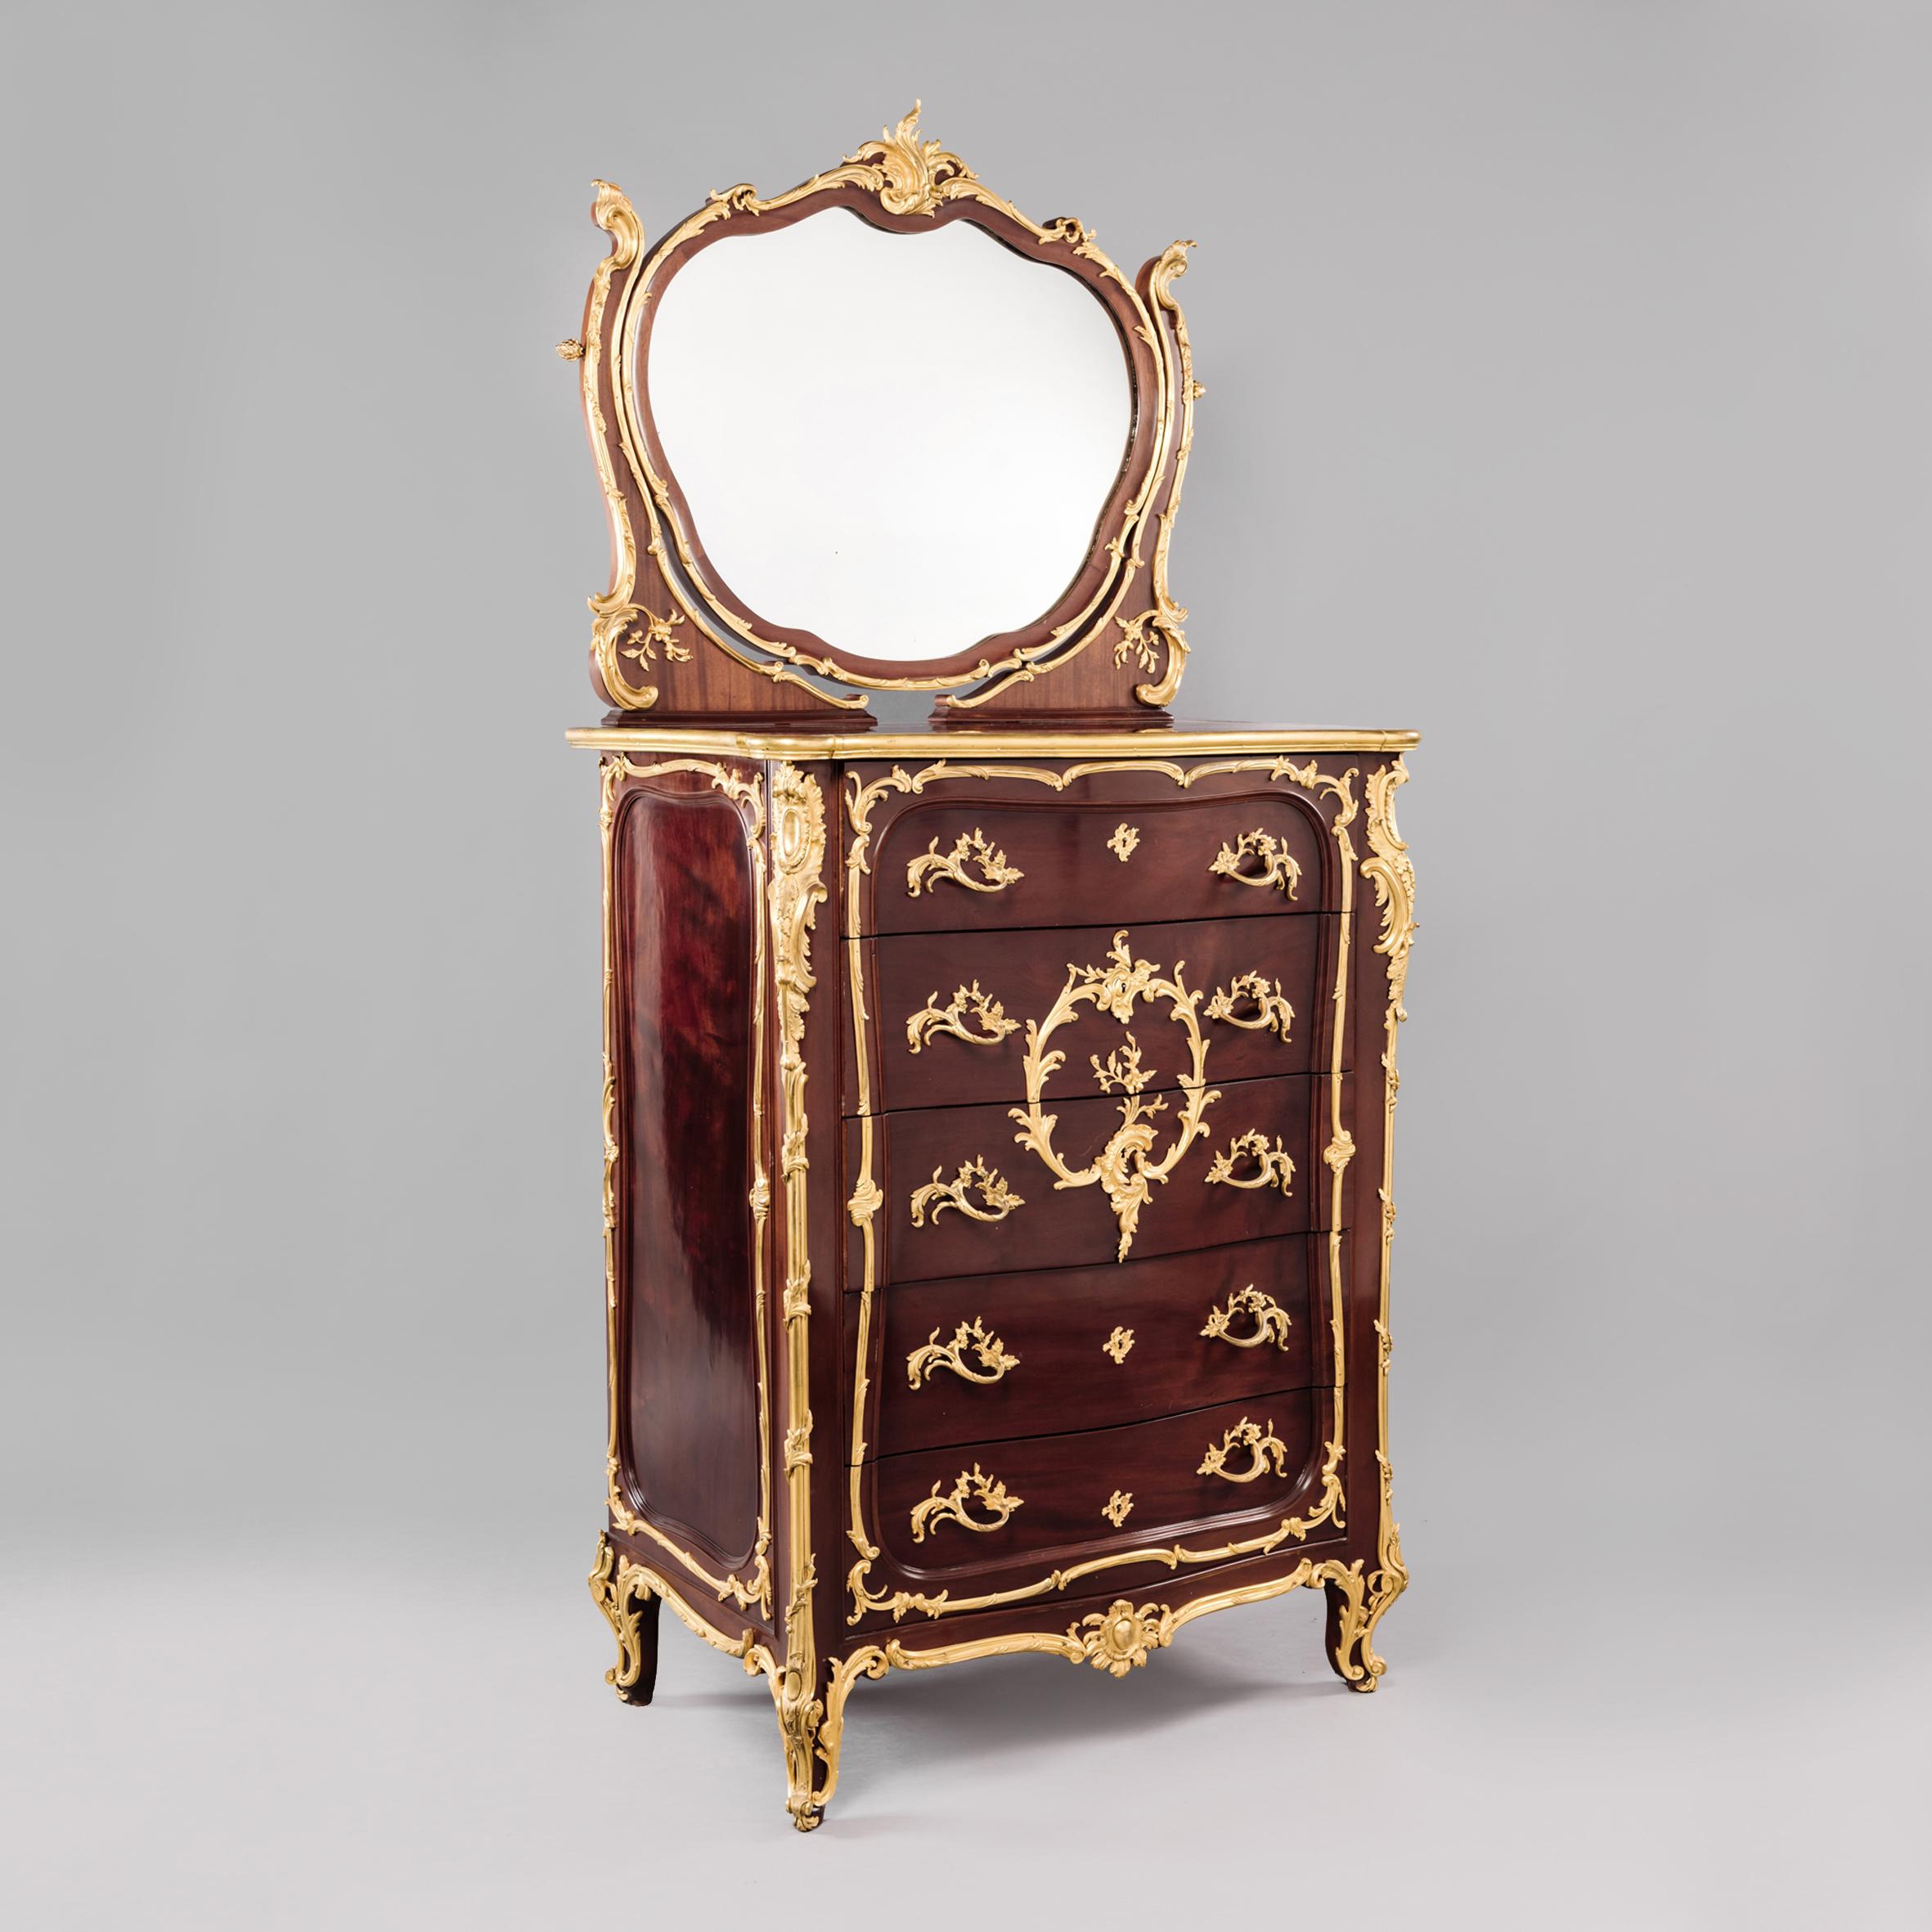 A Louis XV style gilt bronze mounted mahogany Coiffeuse attributed to François Linke. 

French, circa 1910. 

François Linke (1855 - 1946) was the most important Parisian cabinet maker of the late 19th and early 20th centuries, and possibly the